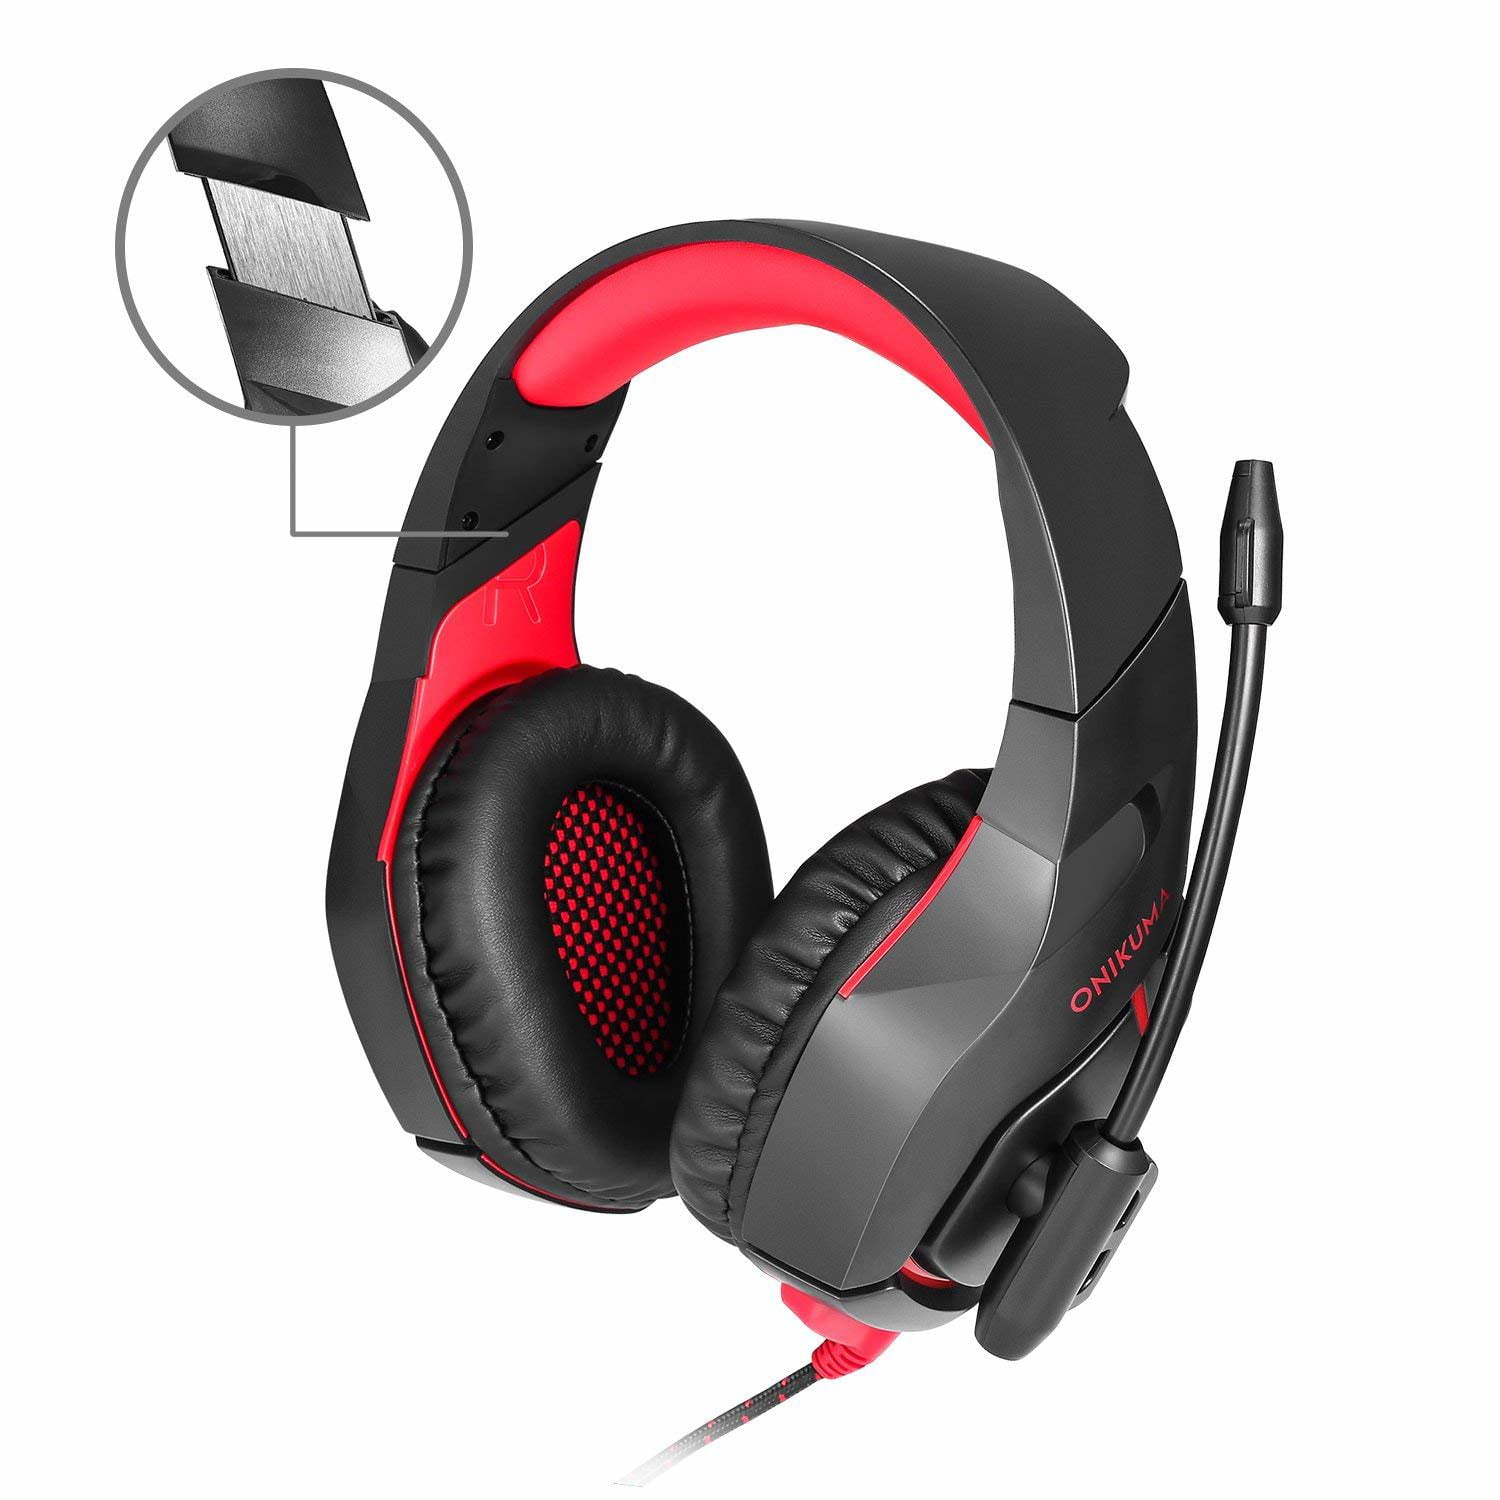 Gaming Headset for PS4 Xbox One, Gaming Headphones with Mic Stereo Surround Noise Reduction LED Lights Volume Control for Laptap, PC, Mac, Smartphones, ect.